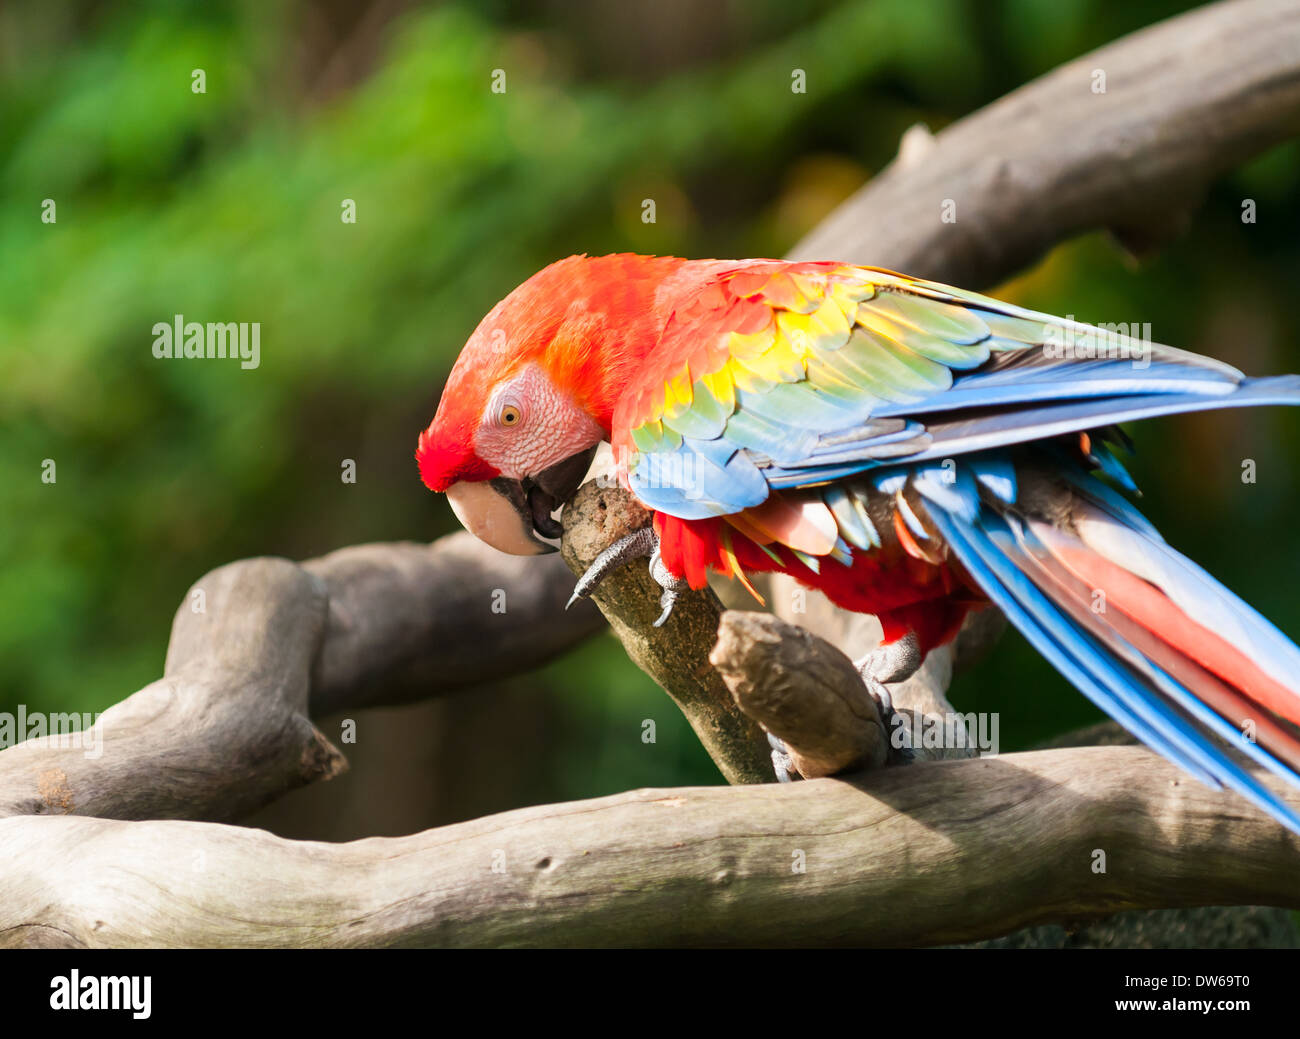 Scarlet macaw (Ara macao) at the Jurong Bird Park in Singapore. Stock Photo